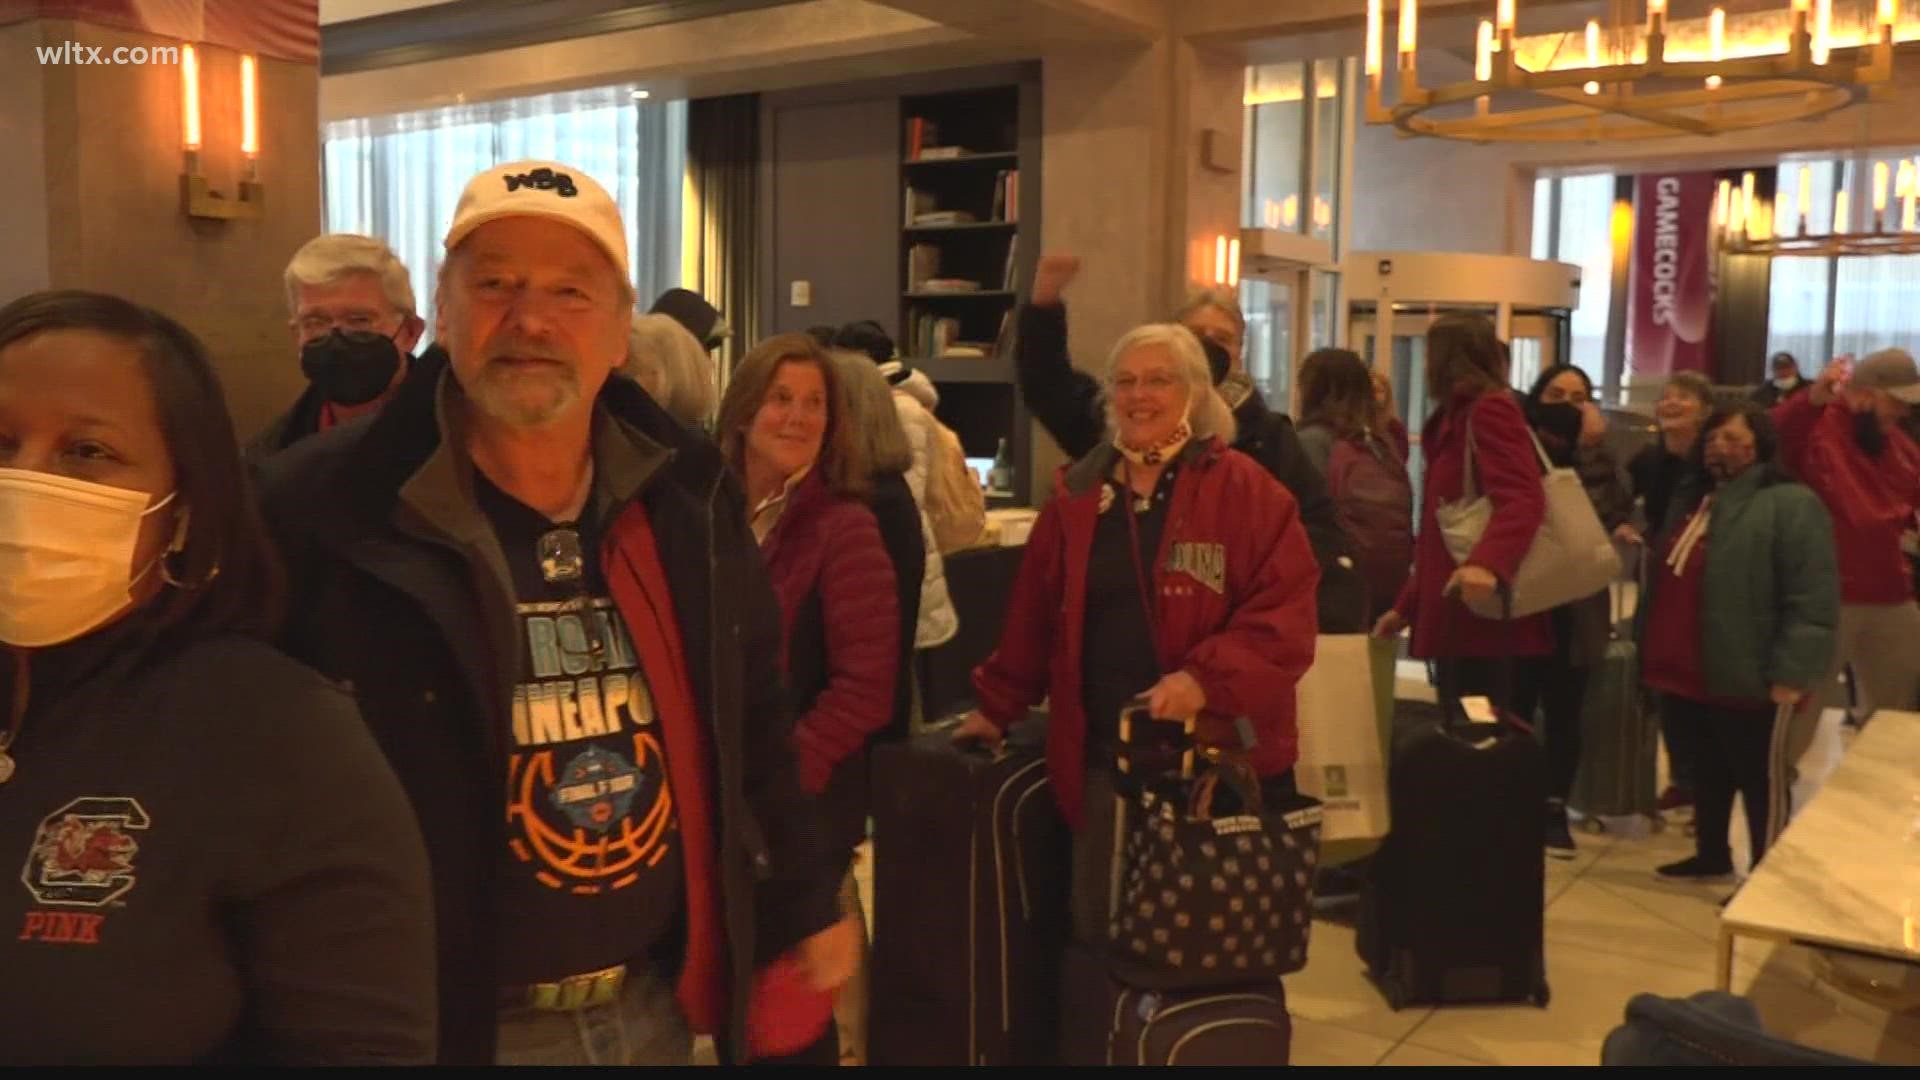 USC Gamecocks fans who chartered their Final Four experience in Minneapolis have arrived.